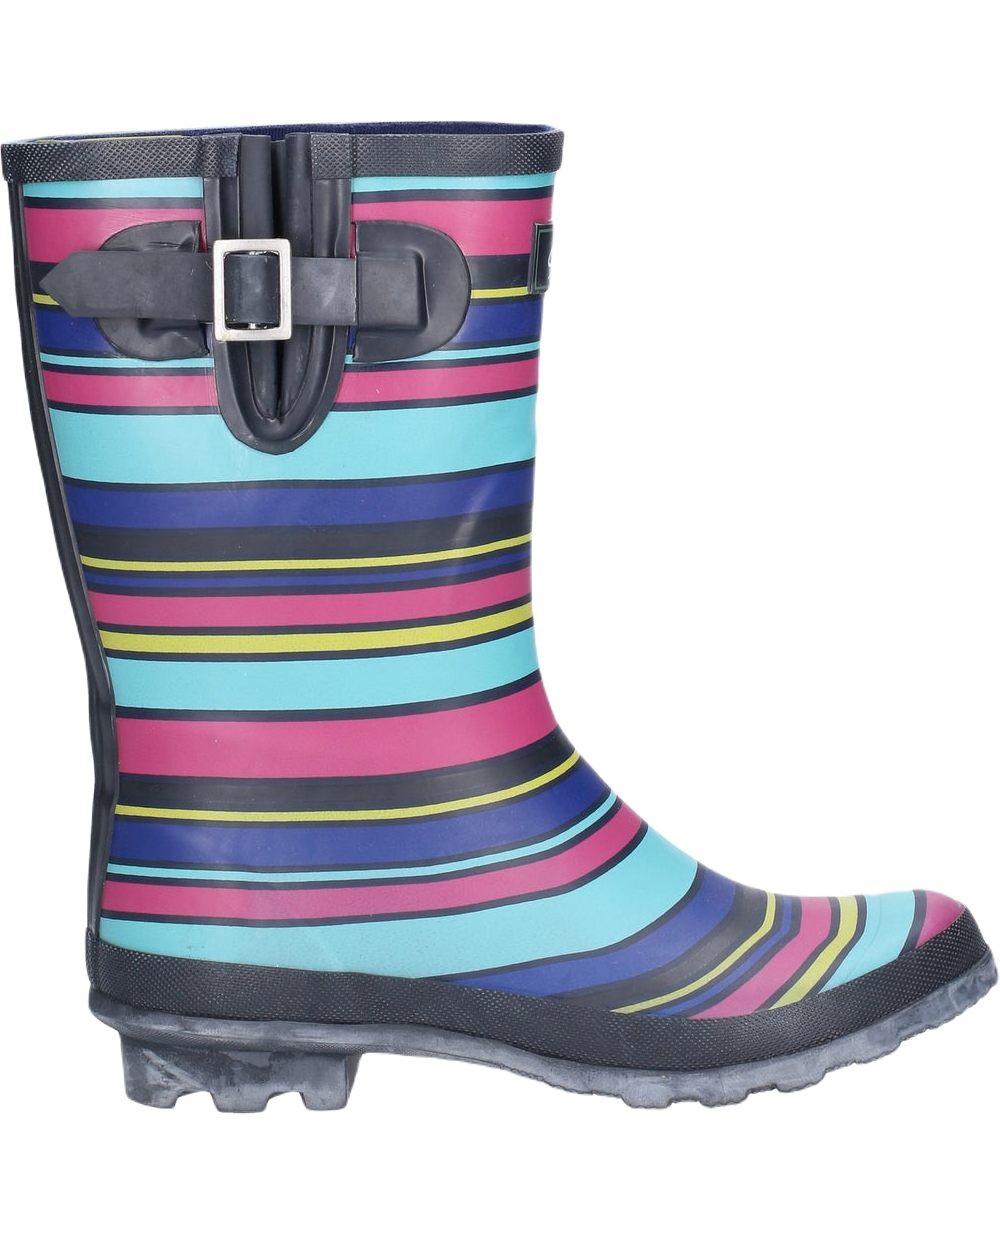 Cotswold Paxford Elasticated Mid Calf Wellington Boots In Multi Stripes 